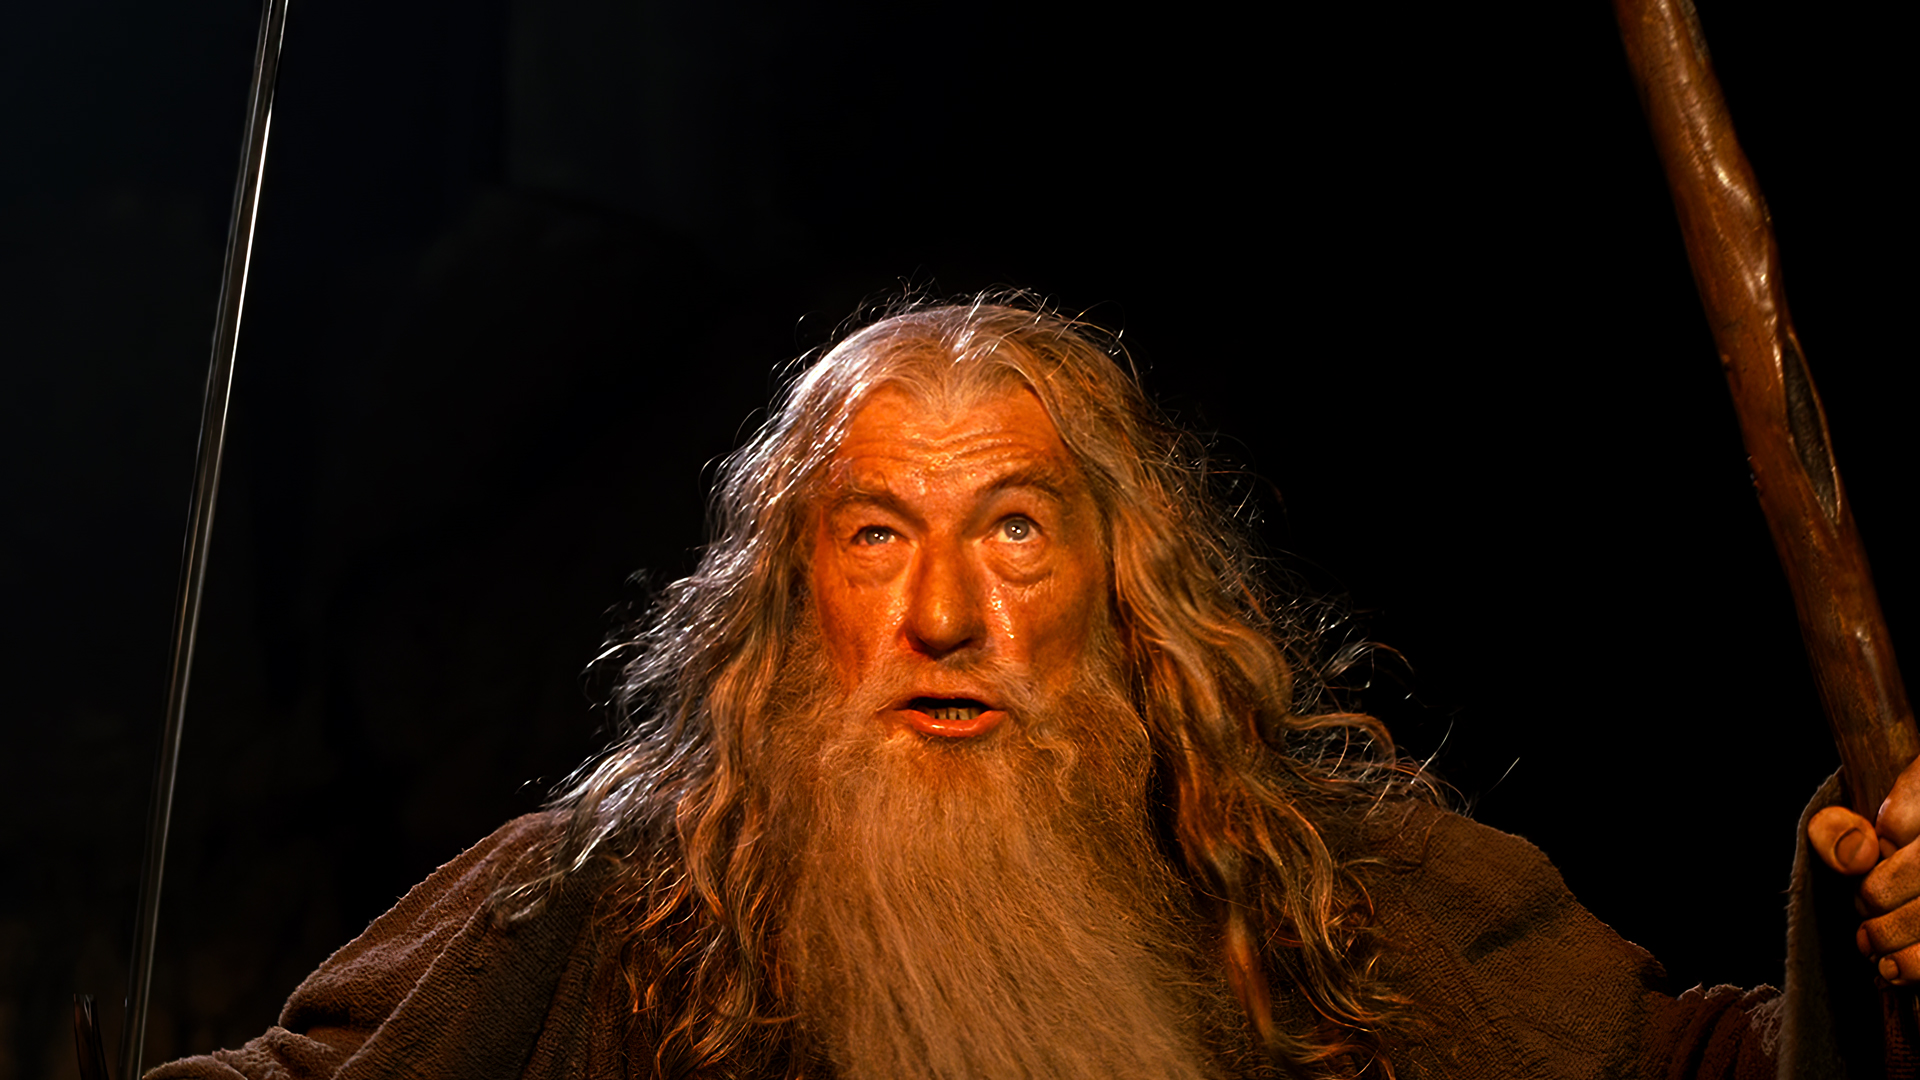 The Lord Of The Rings The Two Towers Movies Film Stills Gandalf Ian McKellen Actor Wizard Sword Bear 1920x1080